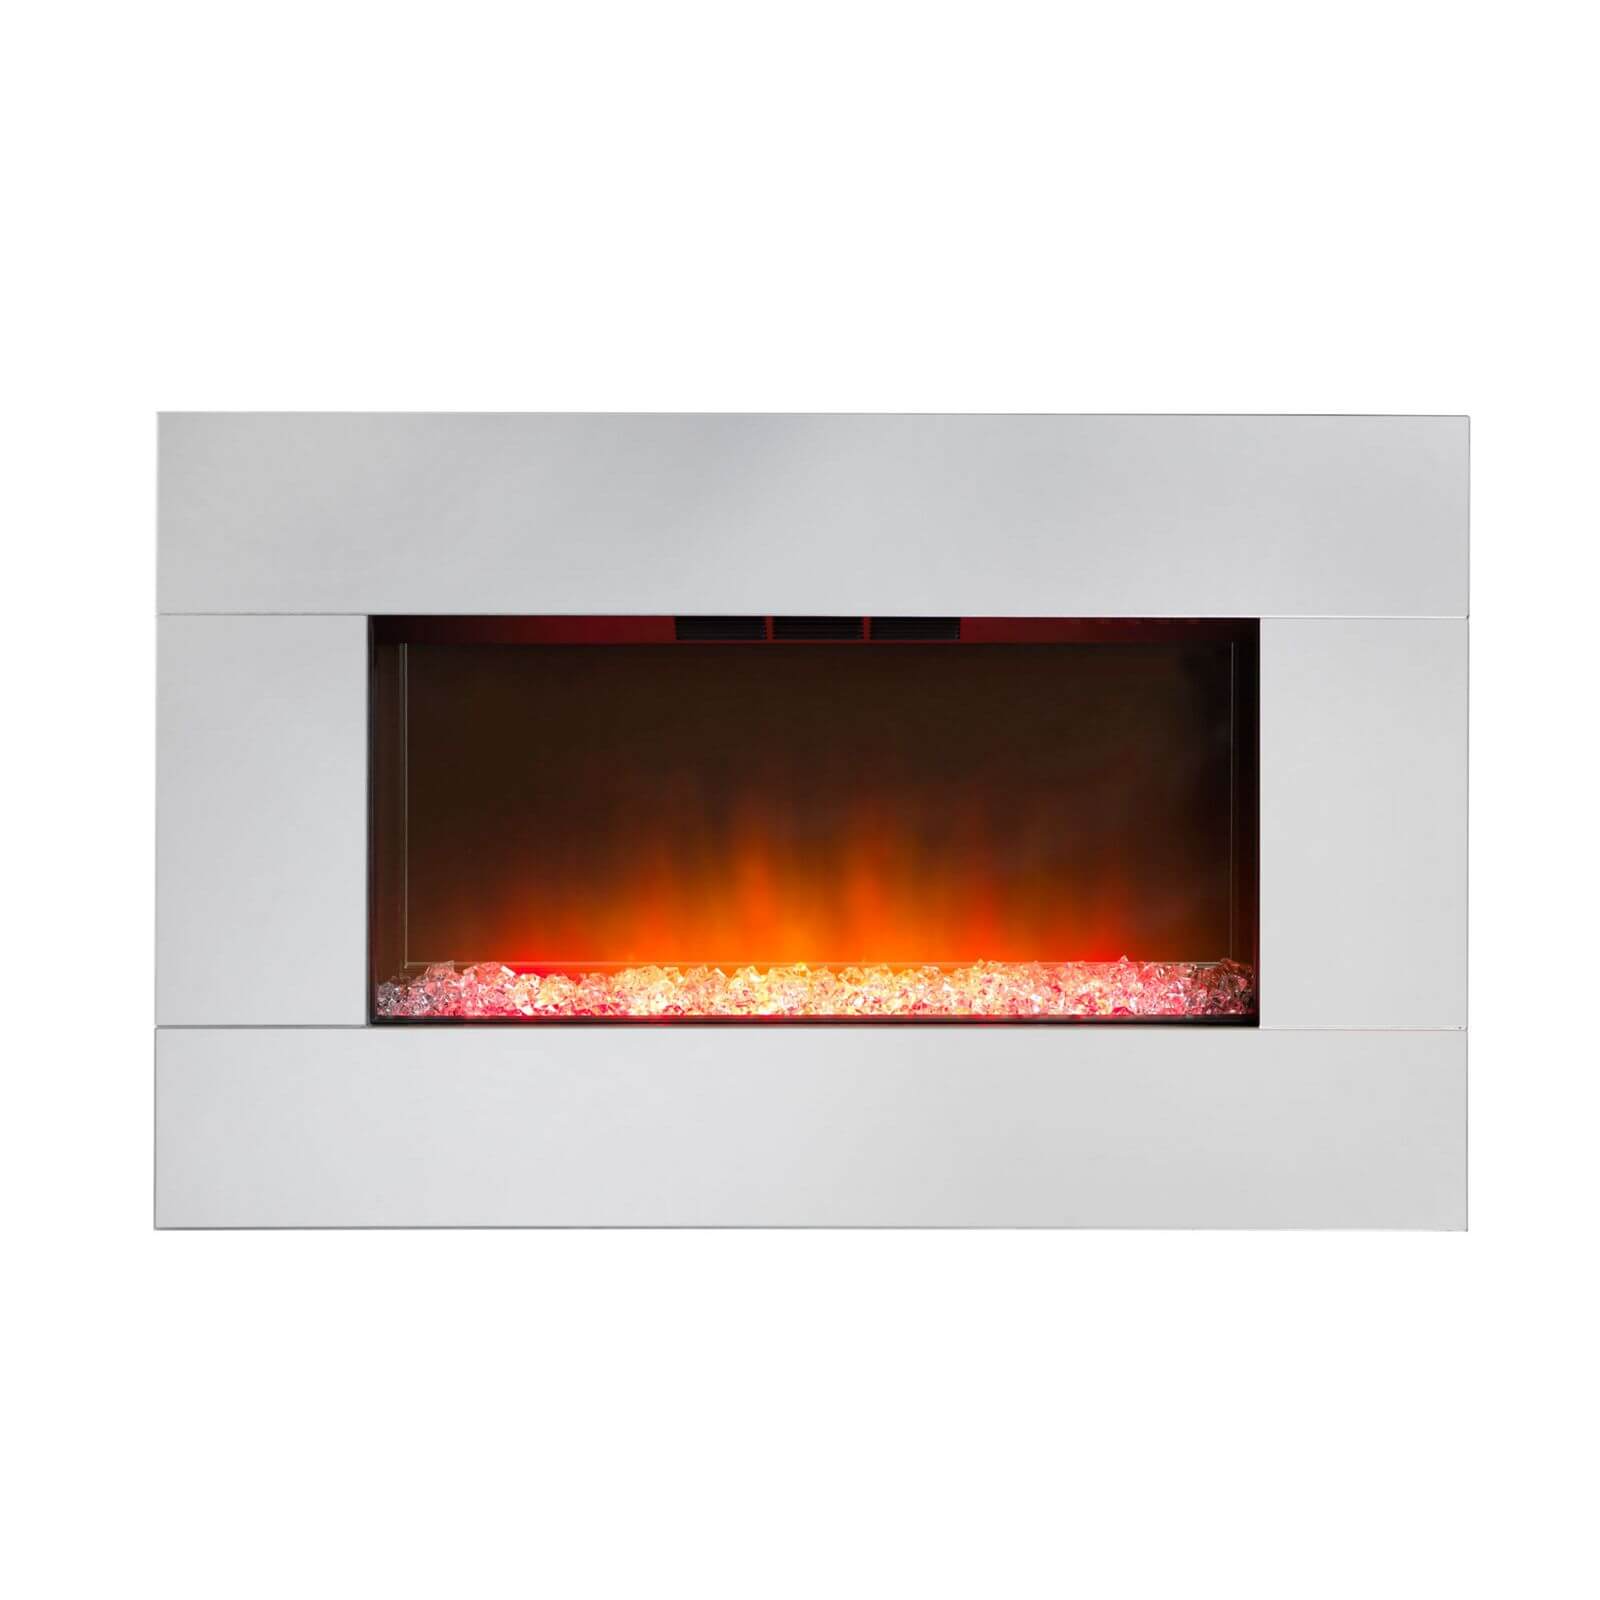 Dimplex Diamantique Optiflame Electric Fire with Wall Mounted Fitting - Mirrored Glass